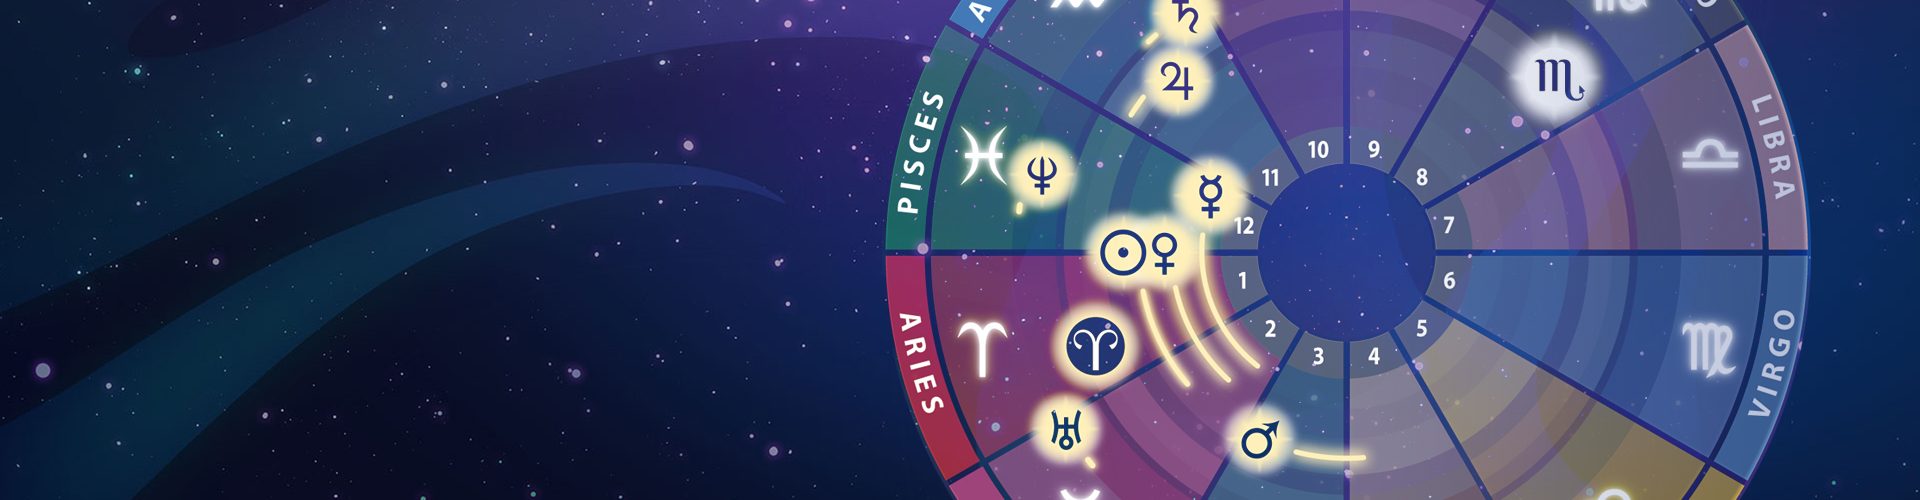 April 2021 Astrology Forecast - The Astrology Podcast